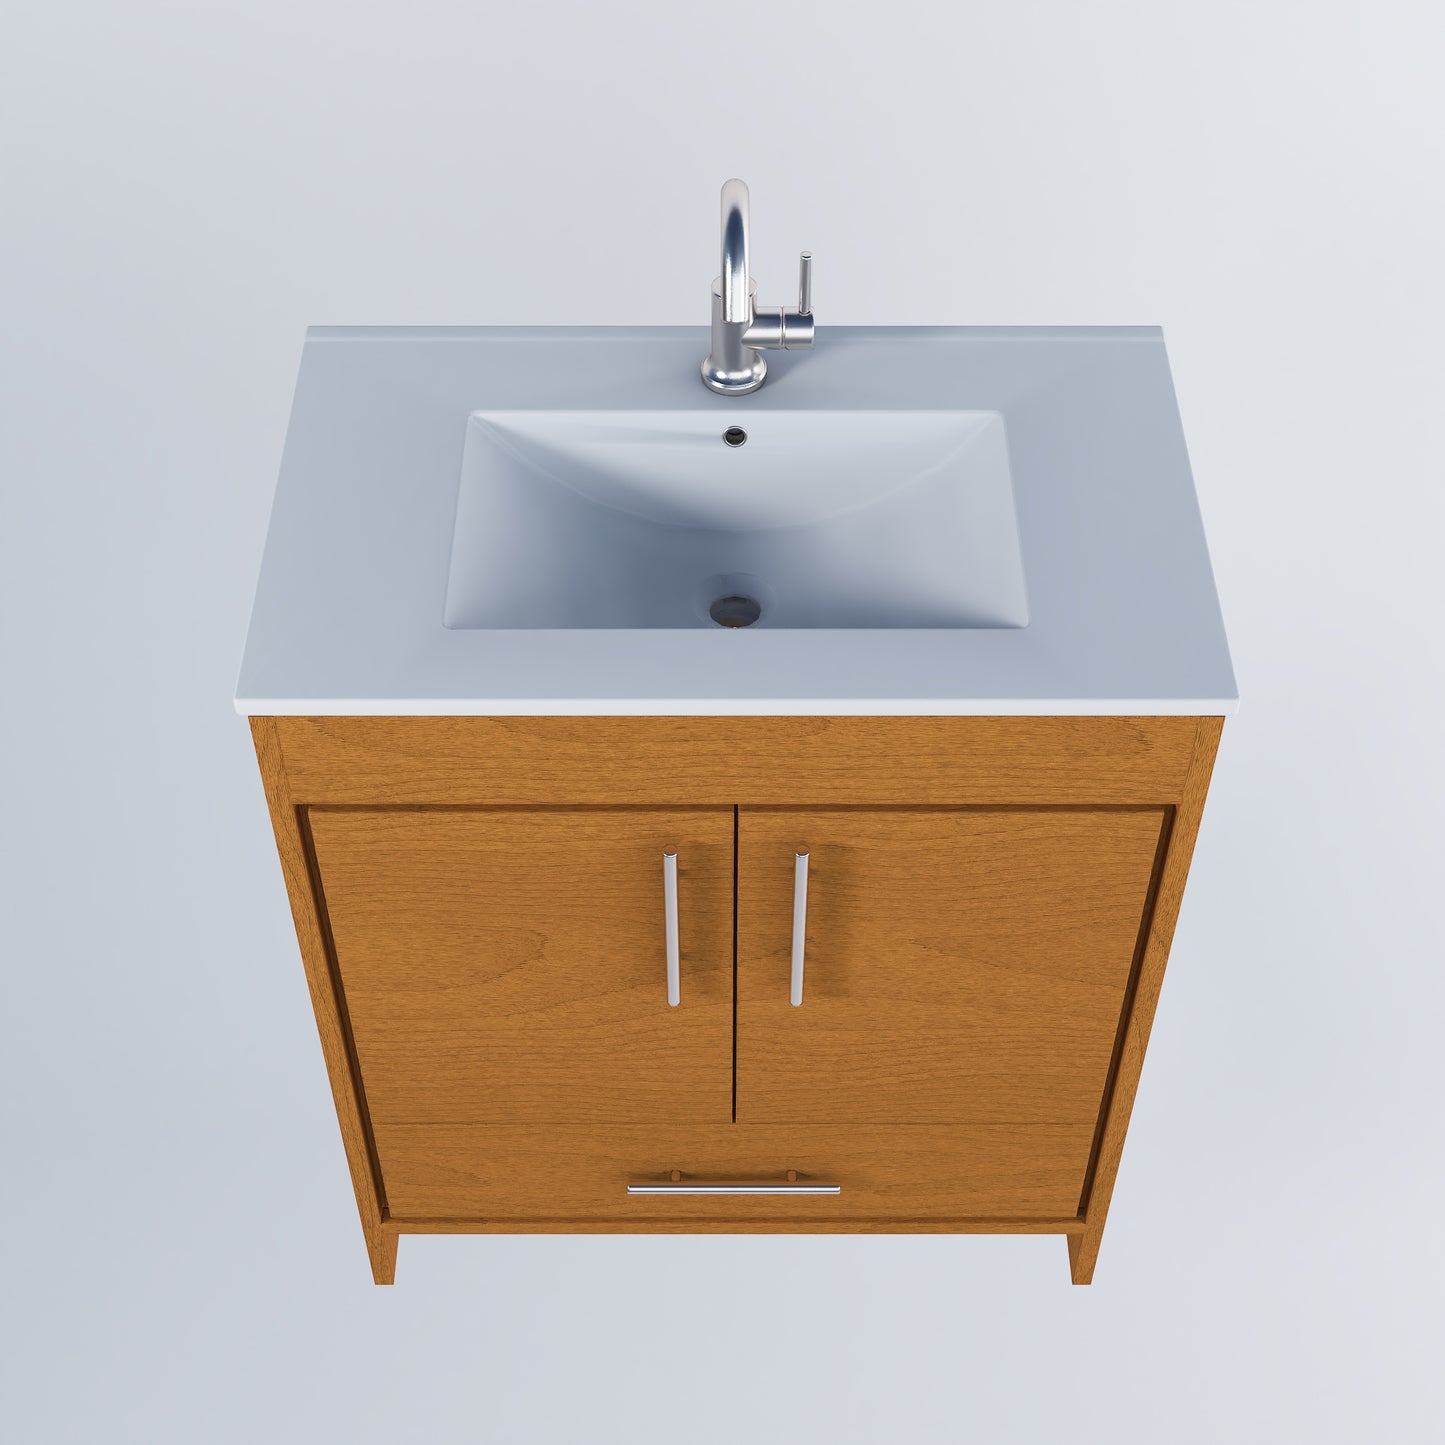 Pacific 32" Bathroom Vanity with Ceramic integrated counter top